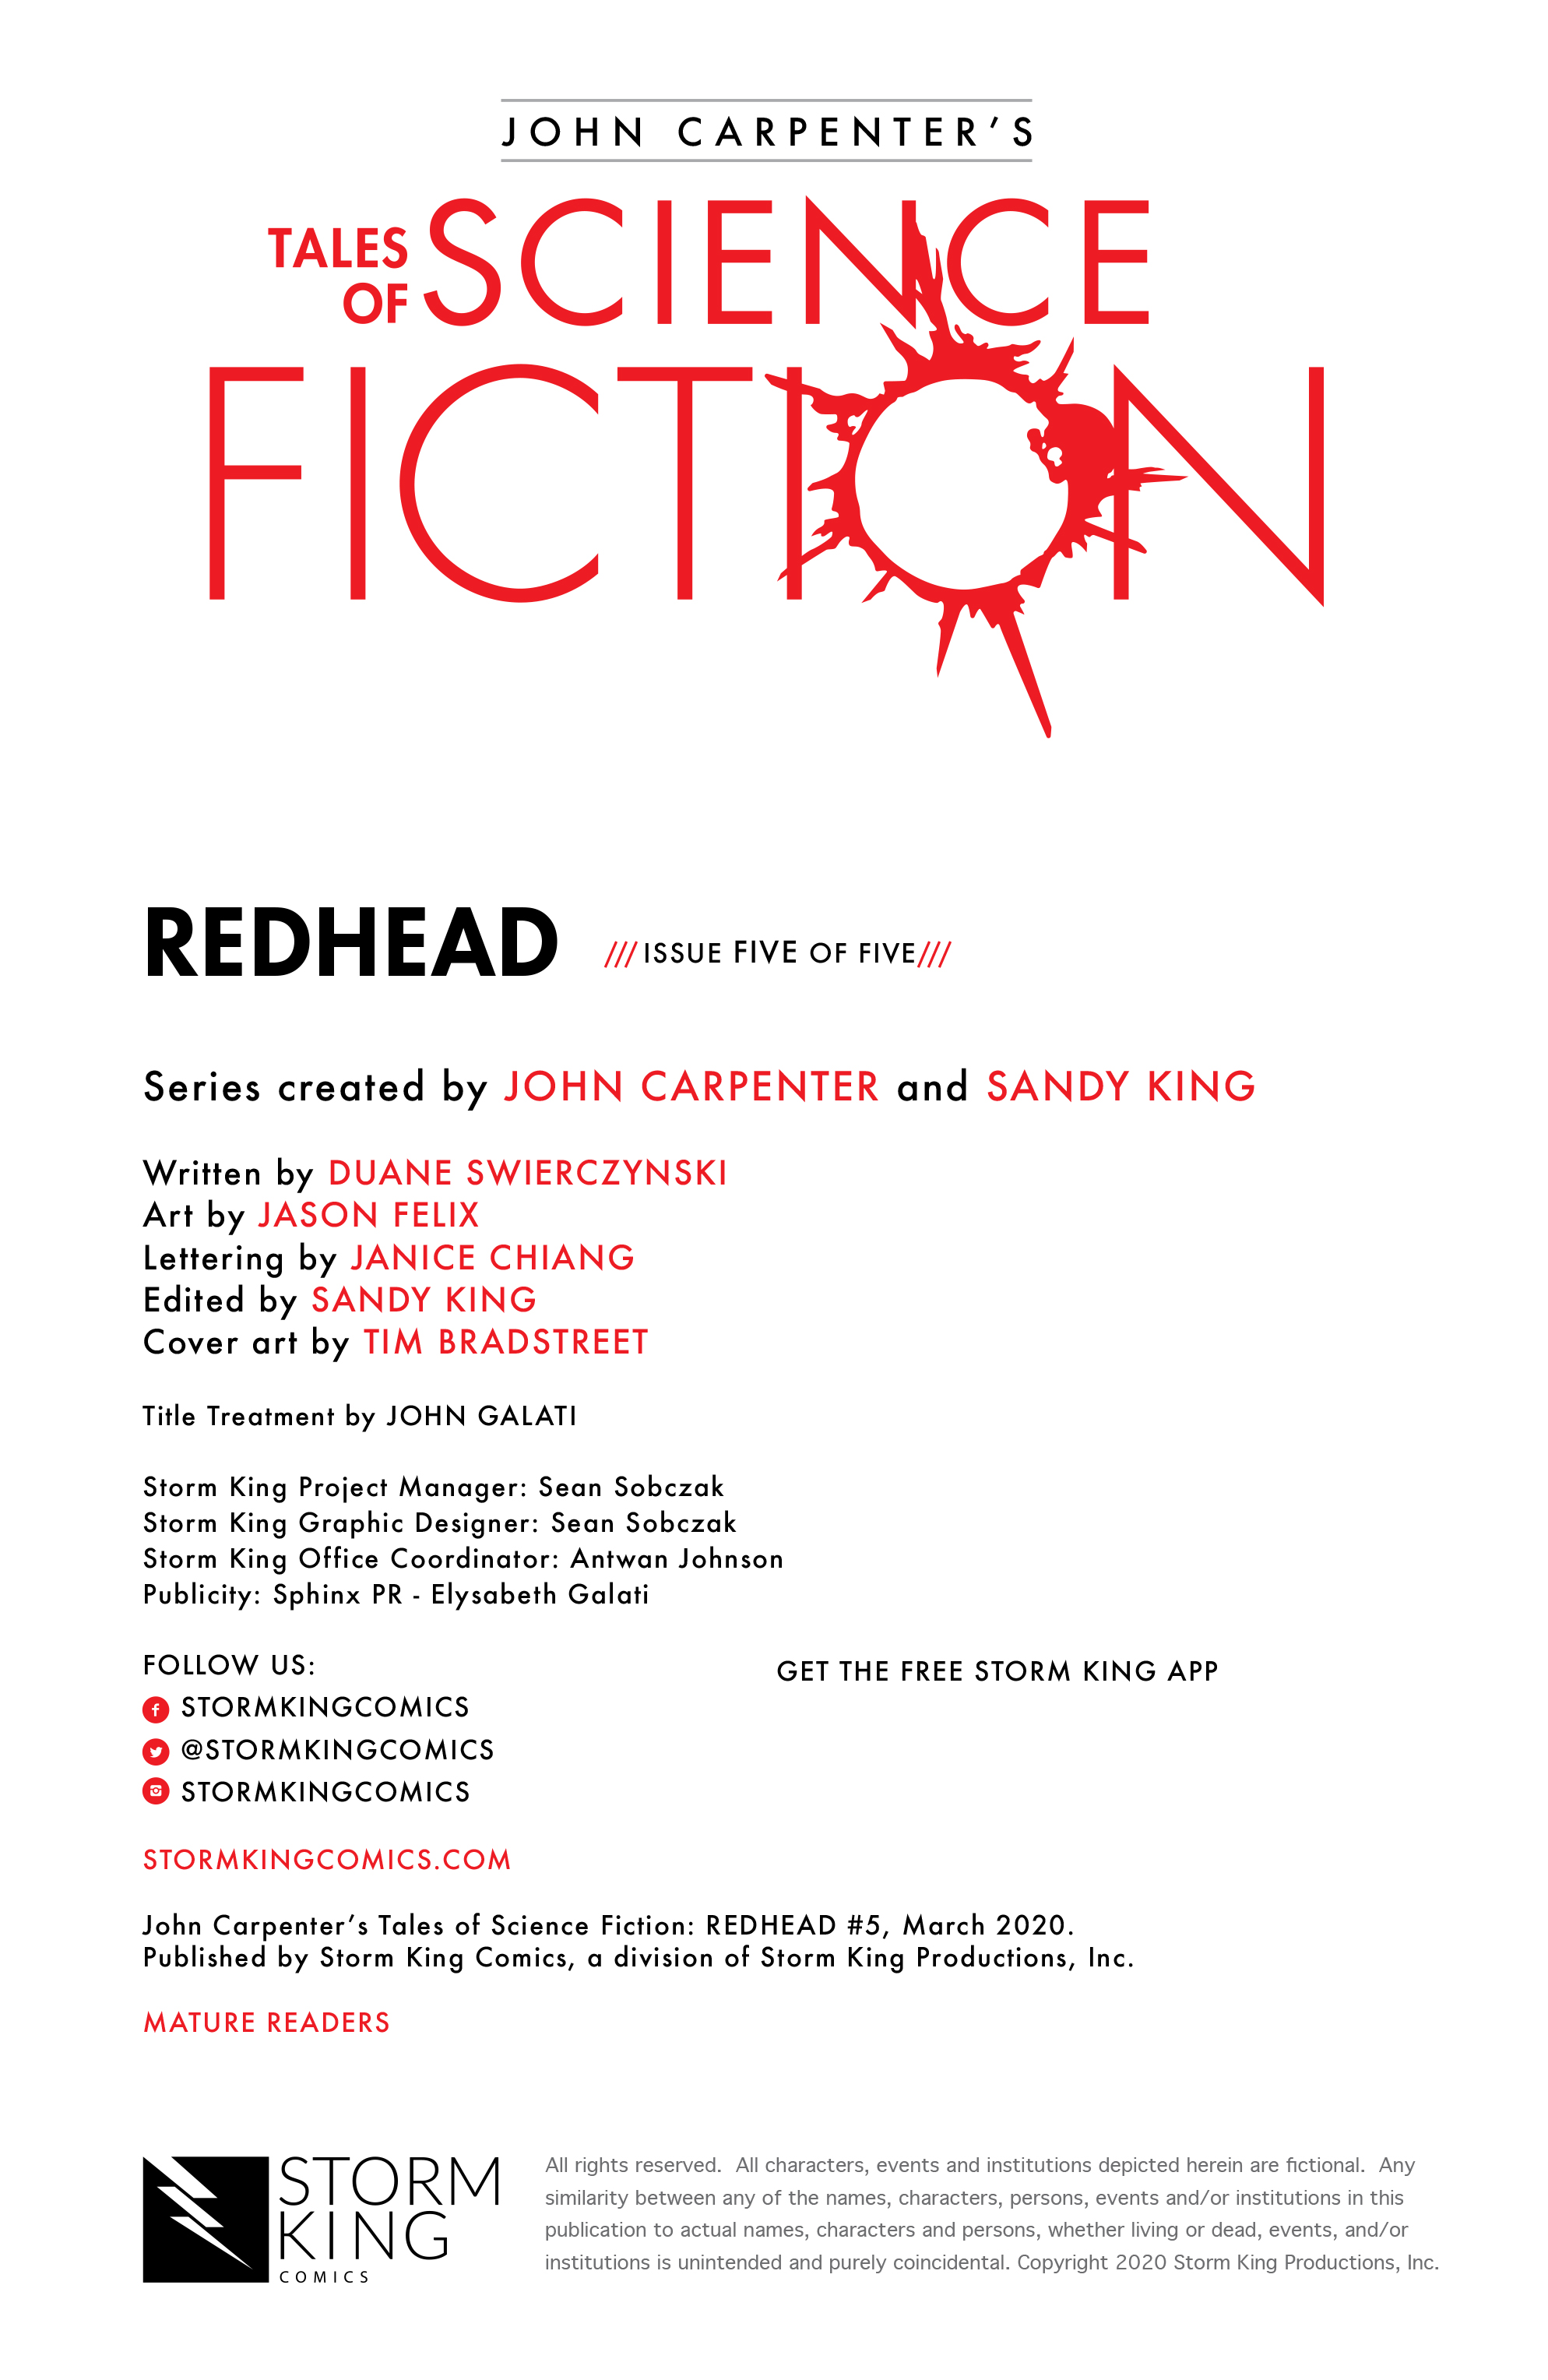 Read online John Carpenter's Tales of Science Fiction: Redhead comic -  Issue #5 - 2